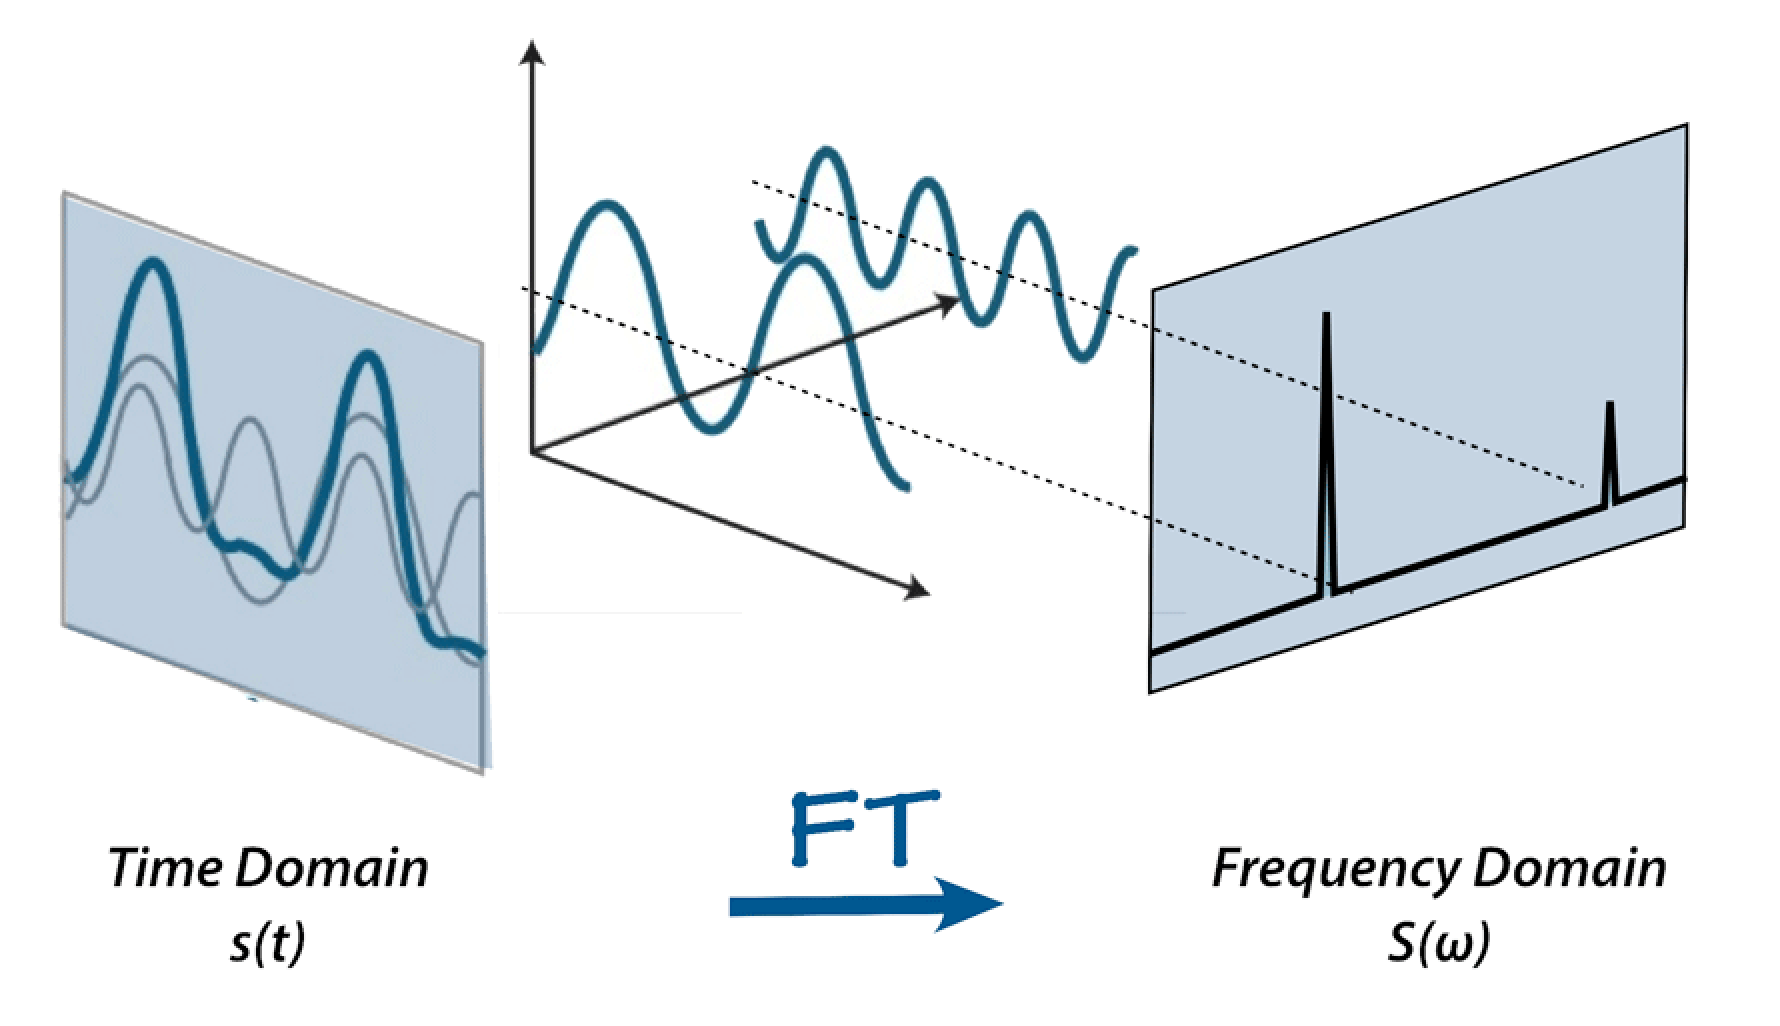 Example of transforming data from the data-domain to the frequency-domain for time series data. Image courtousy of [Allen D. Elster, MD FACR](http://mriquestions.com/index.html).